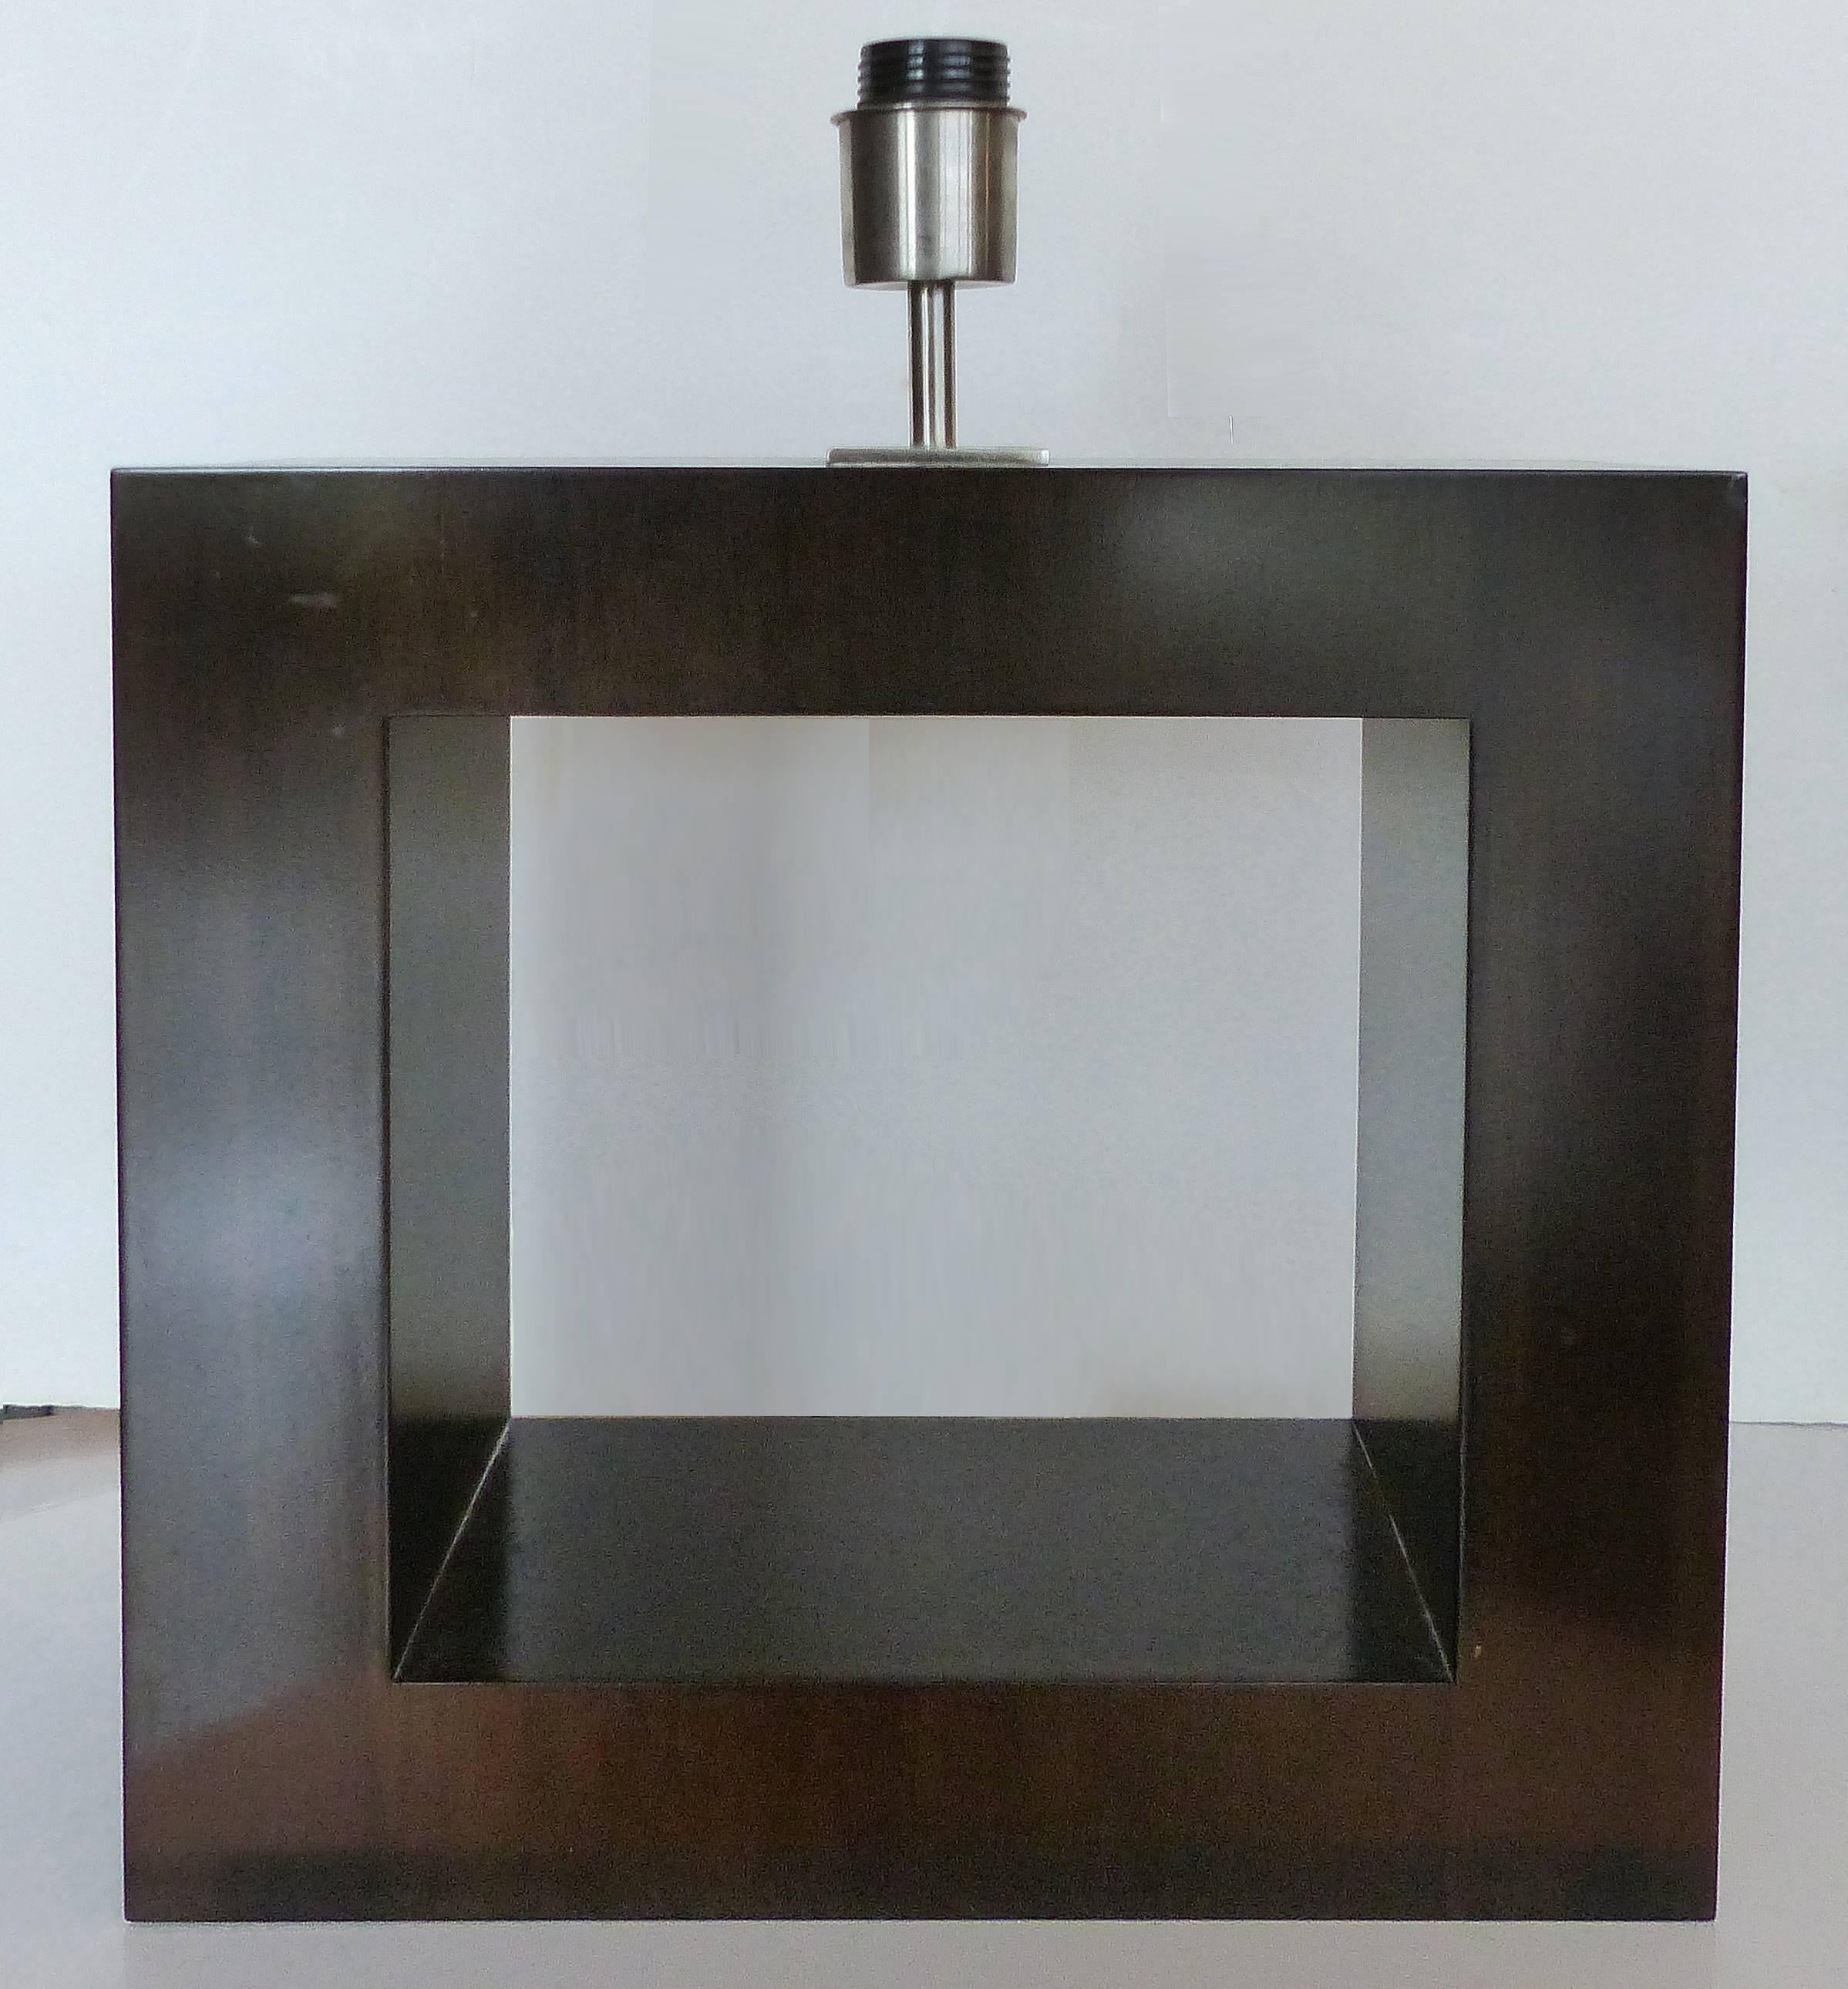 Mid-Century Ebonized Wood Table Lamp

Offered is a Mid-Century Modern open center square wood table lamp that has been ebonized to a deep brown-black finish. The fittings are aluminum and the custom shade is laminated cloth with fabric edging.